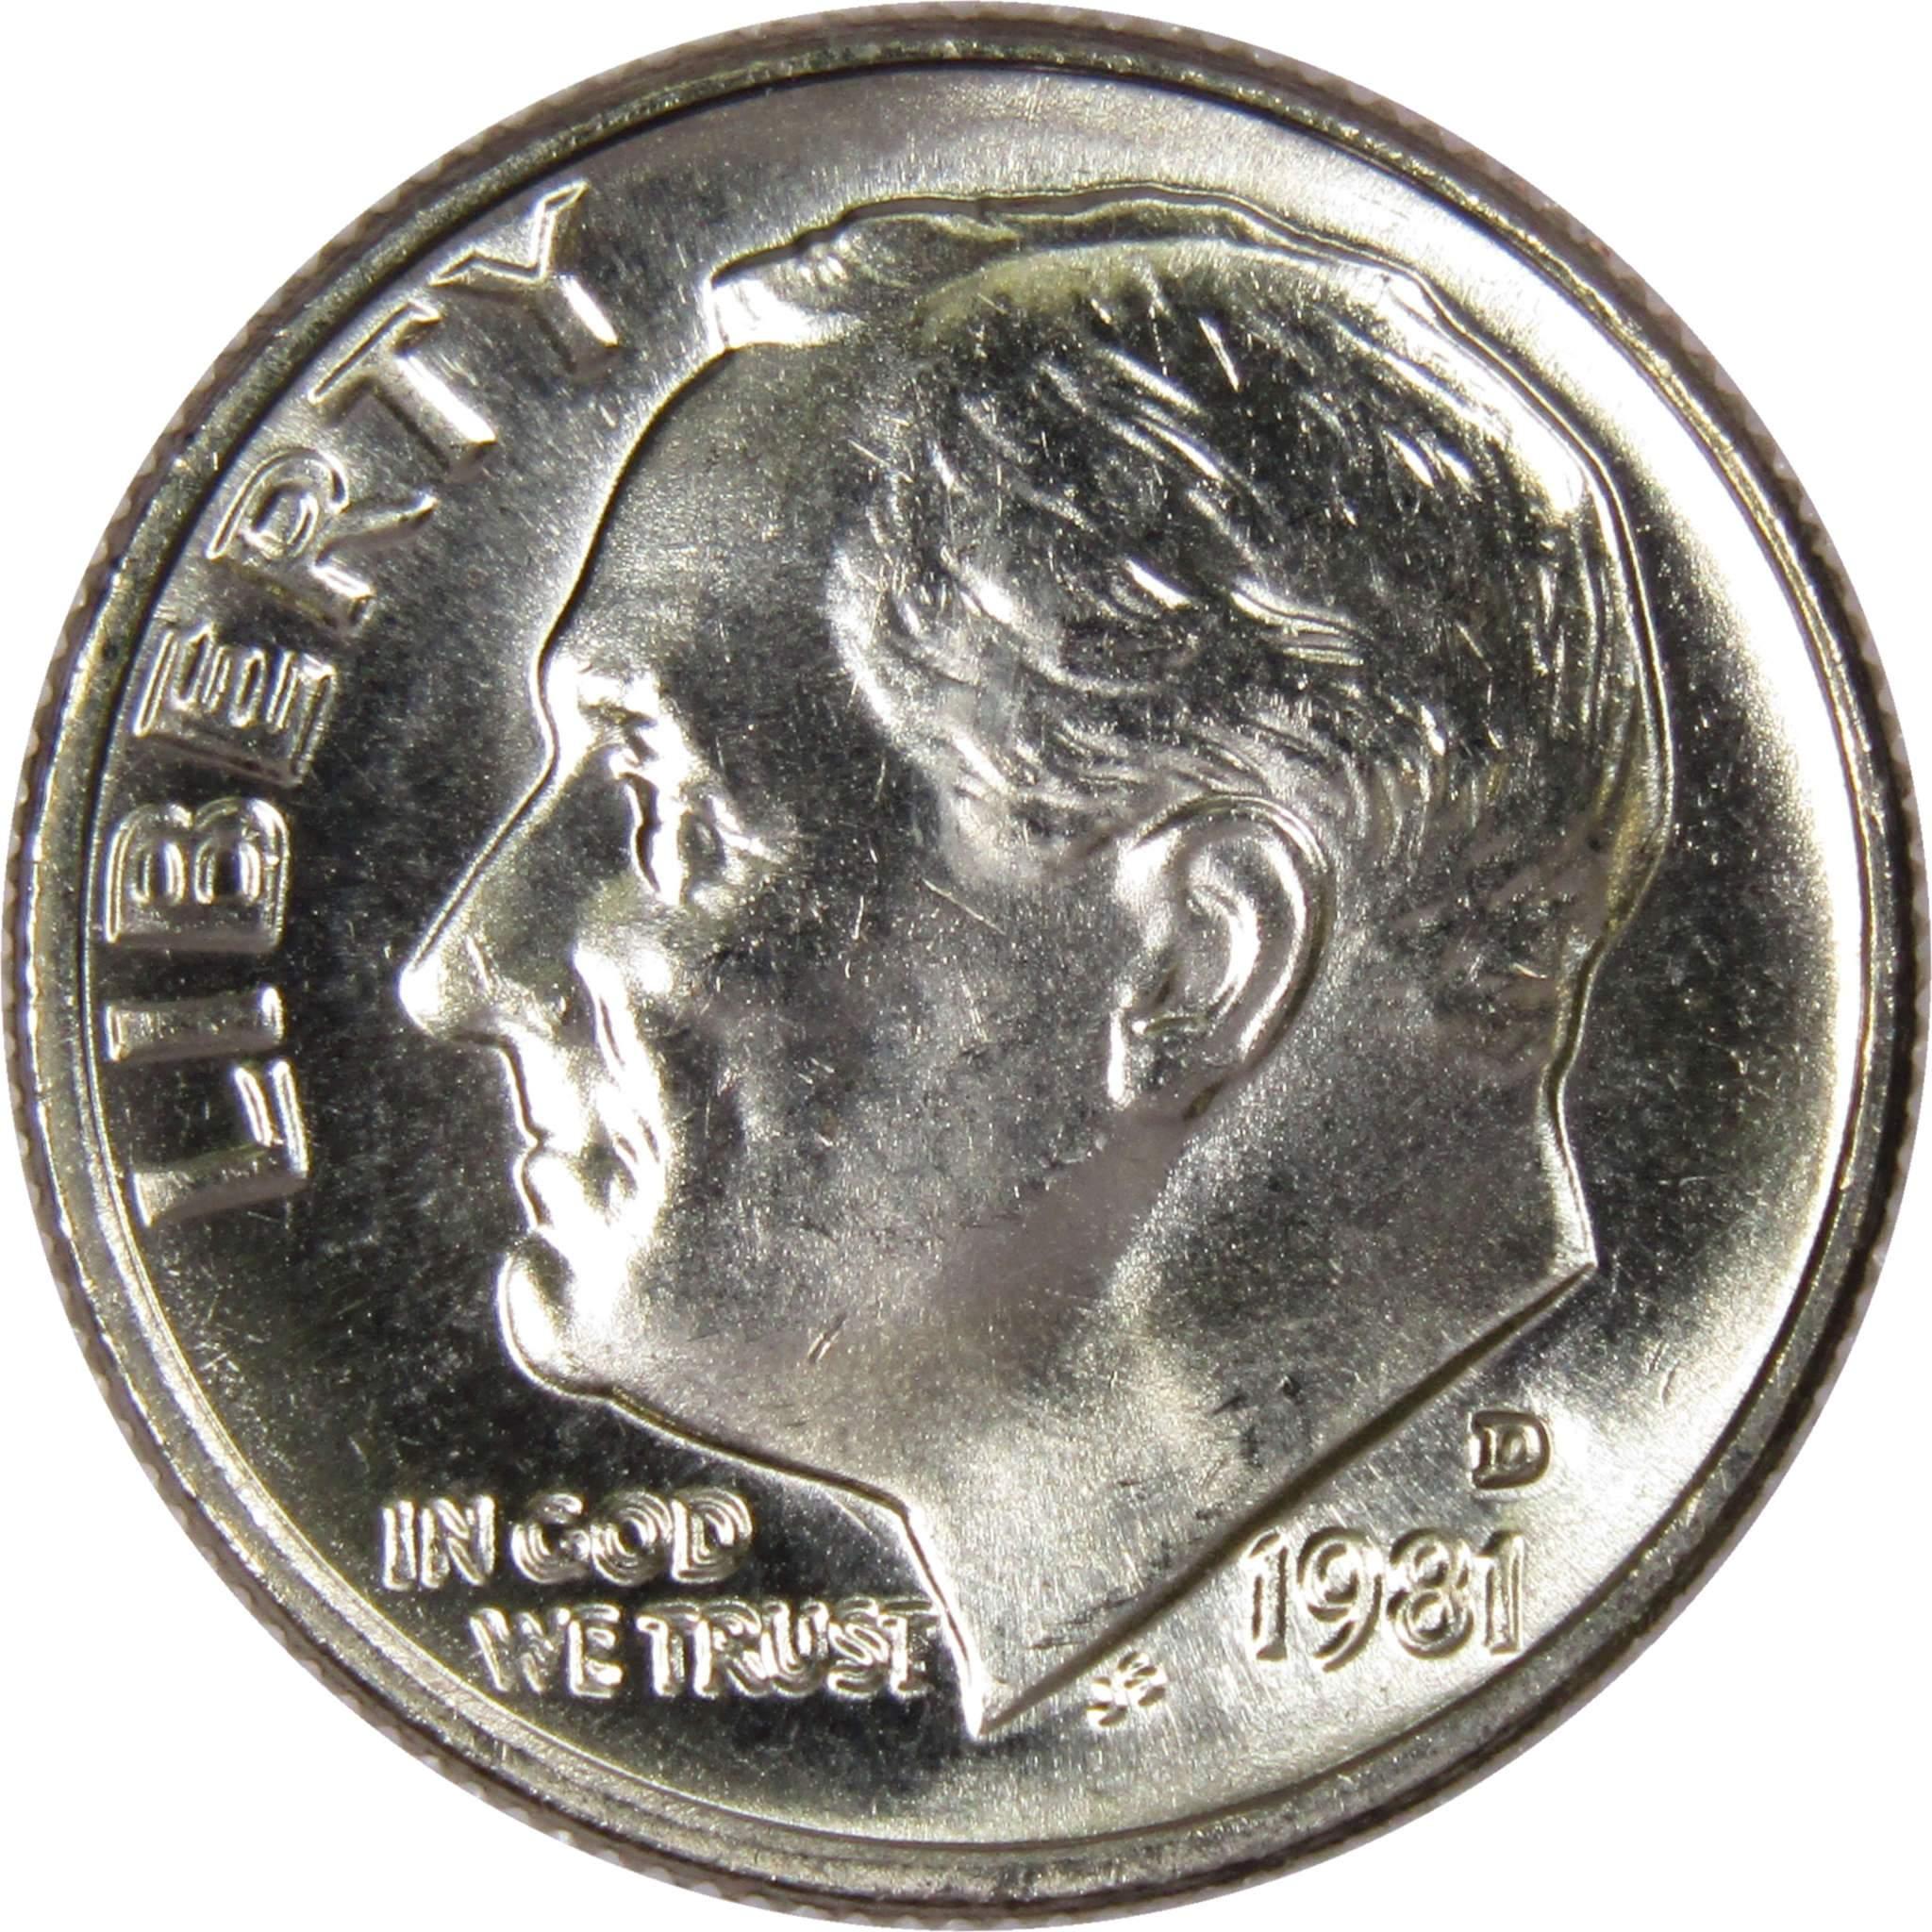 1981 D Roosevelt Dime BU Uncirculated Mint State 10c US Coin Collectible